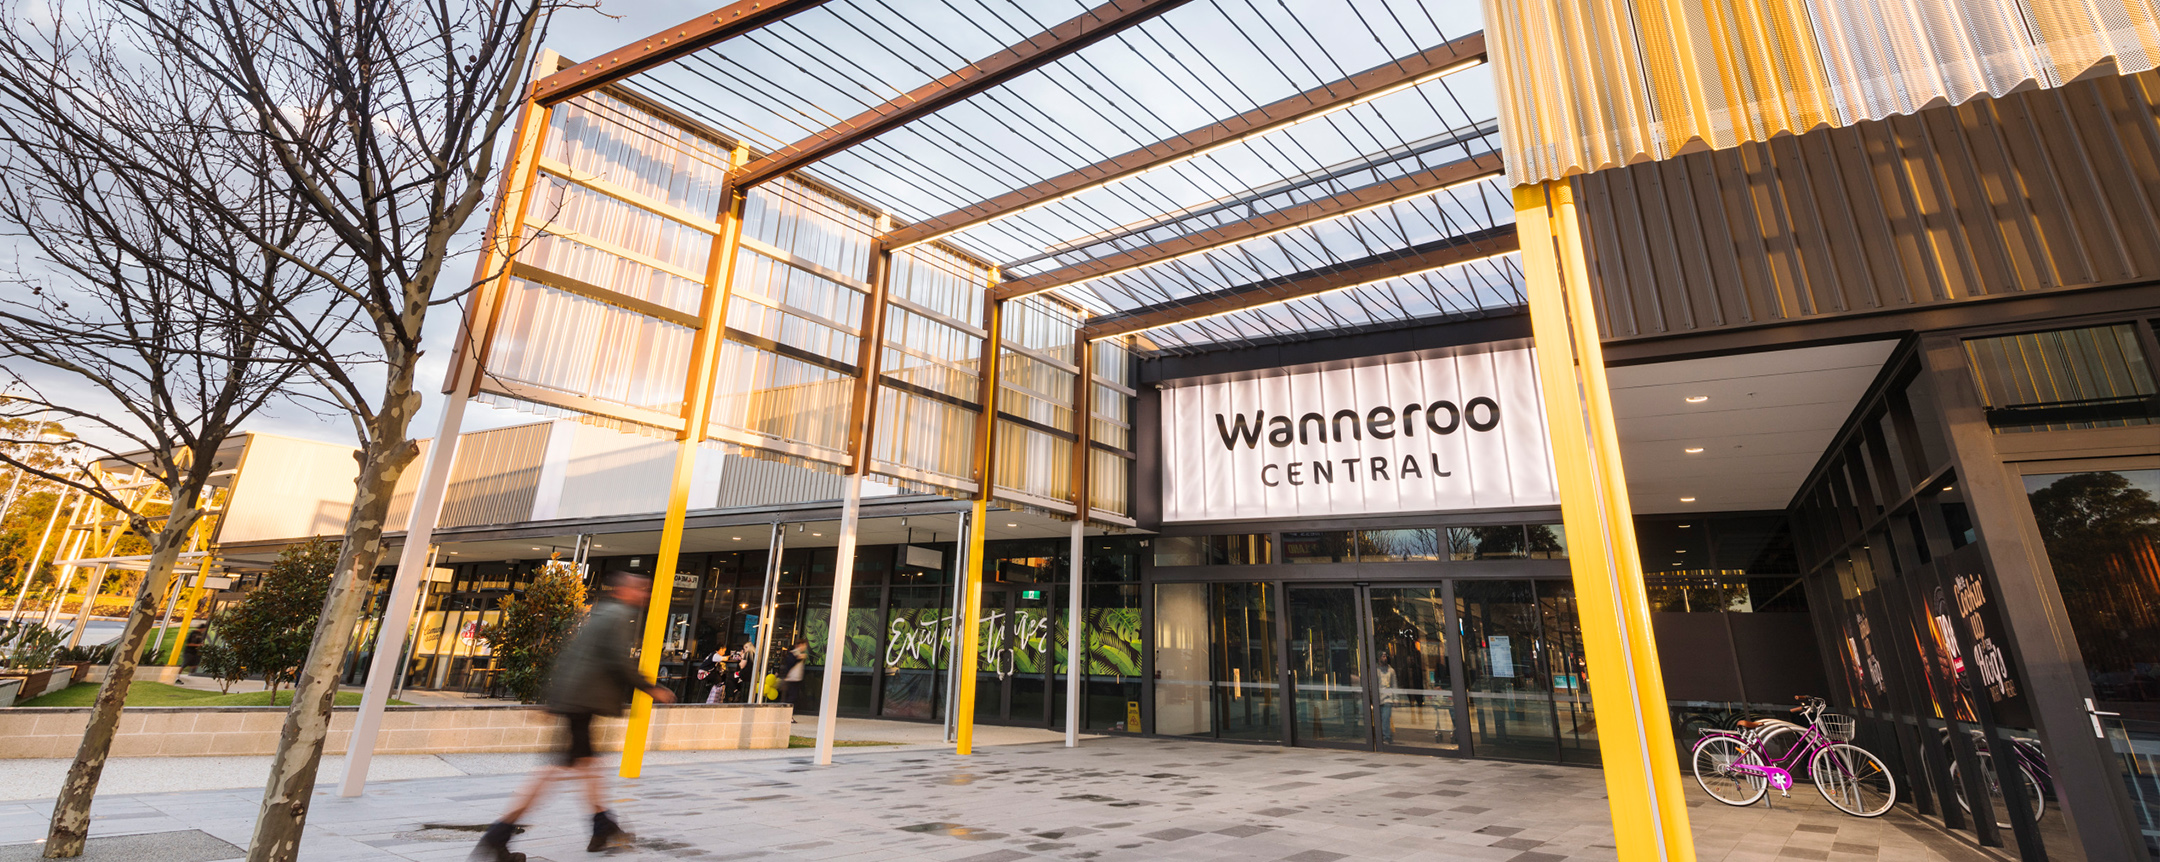 Updated wanneroo-central-web-content-1400x660-3